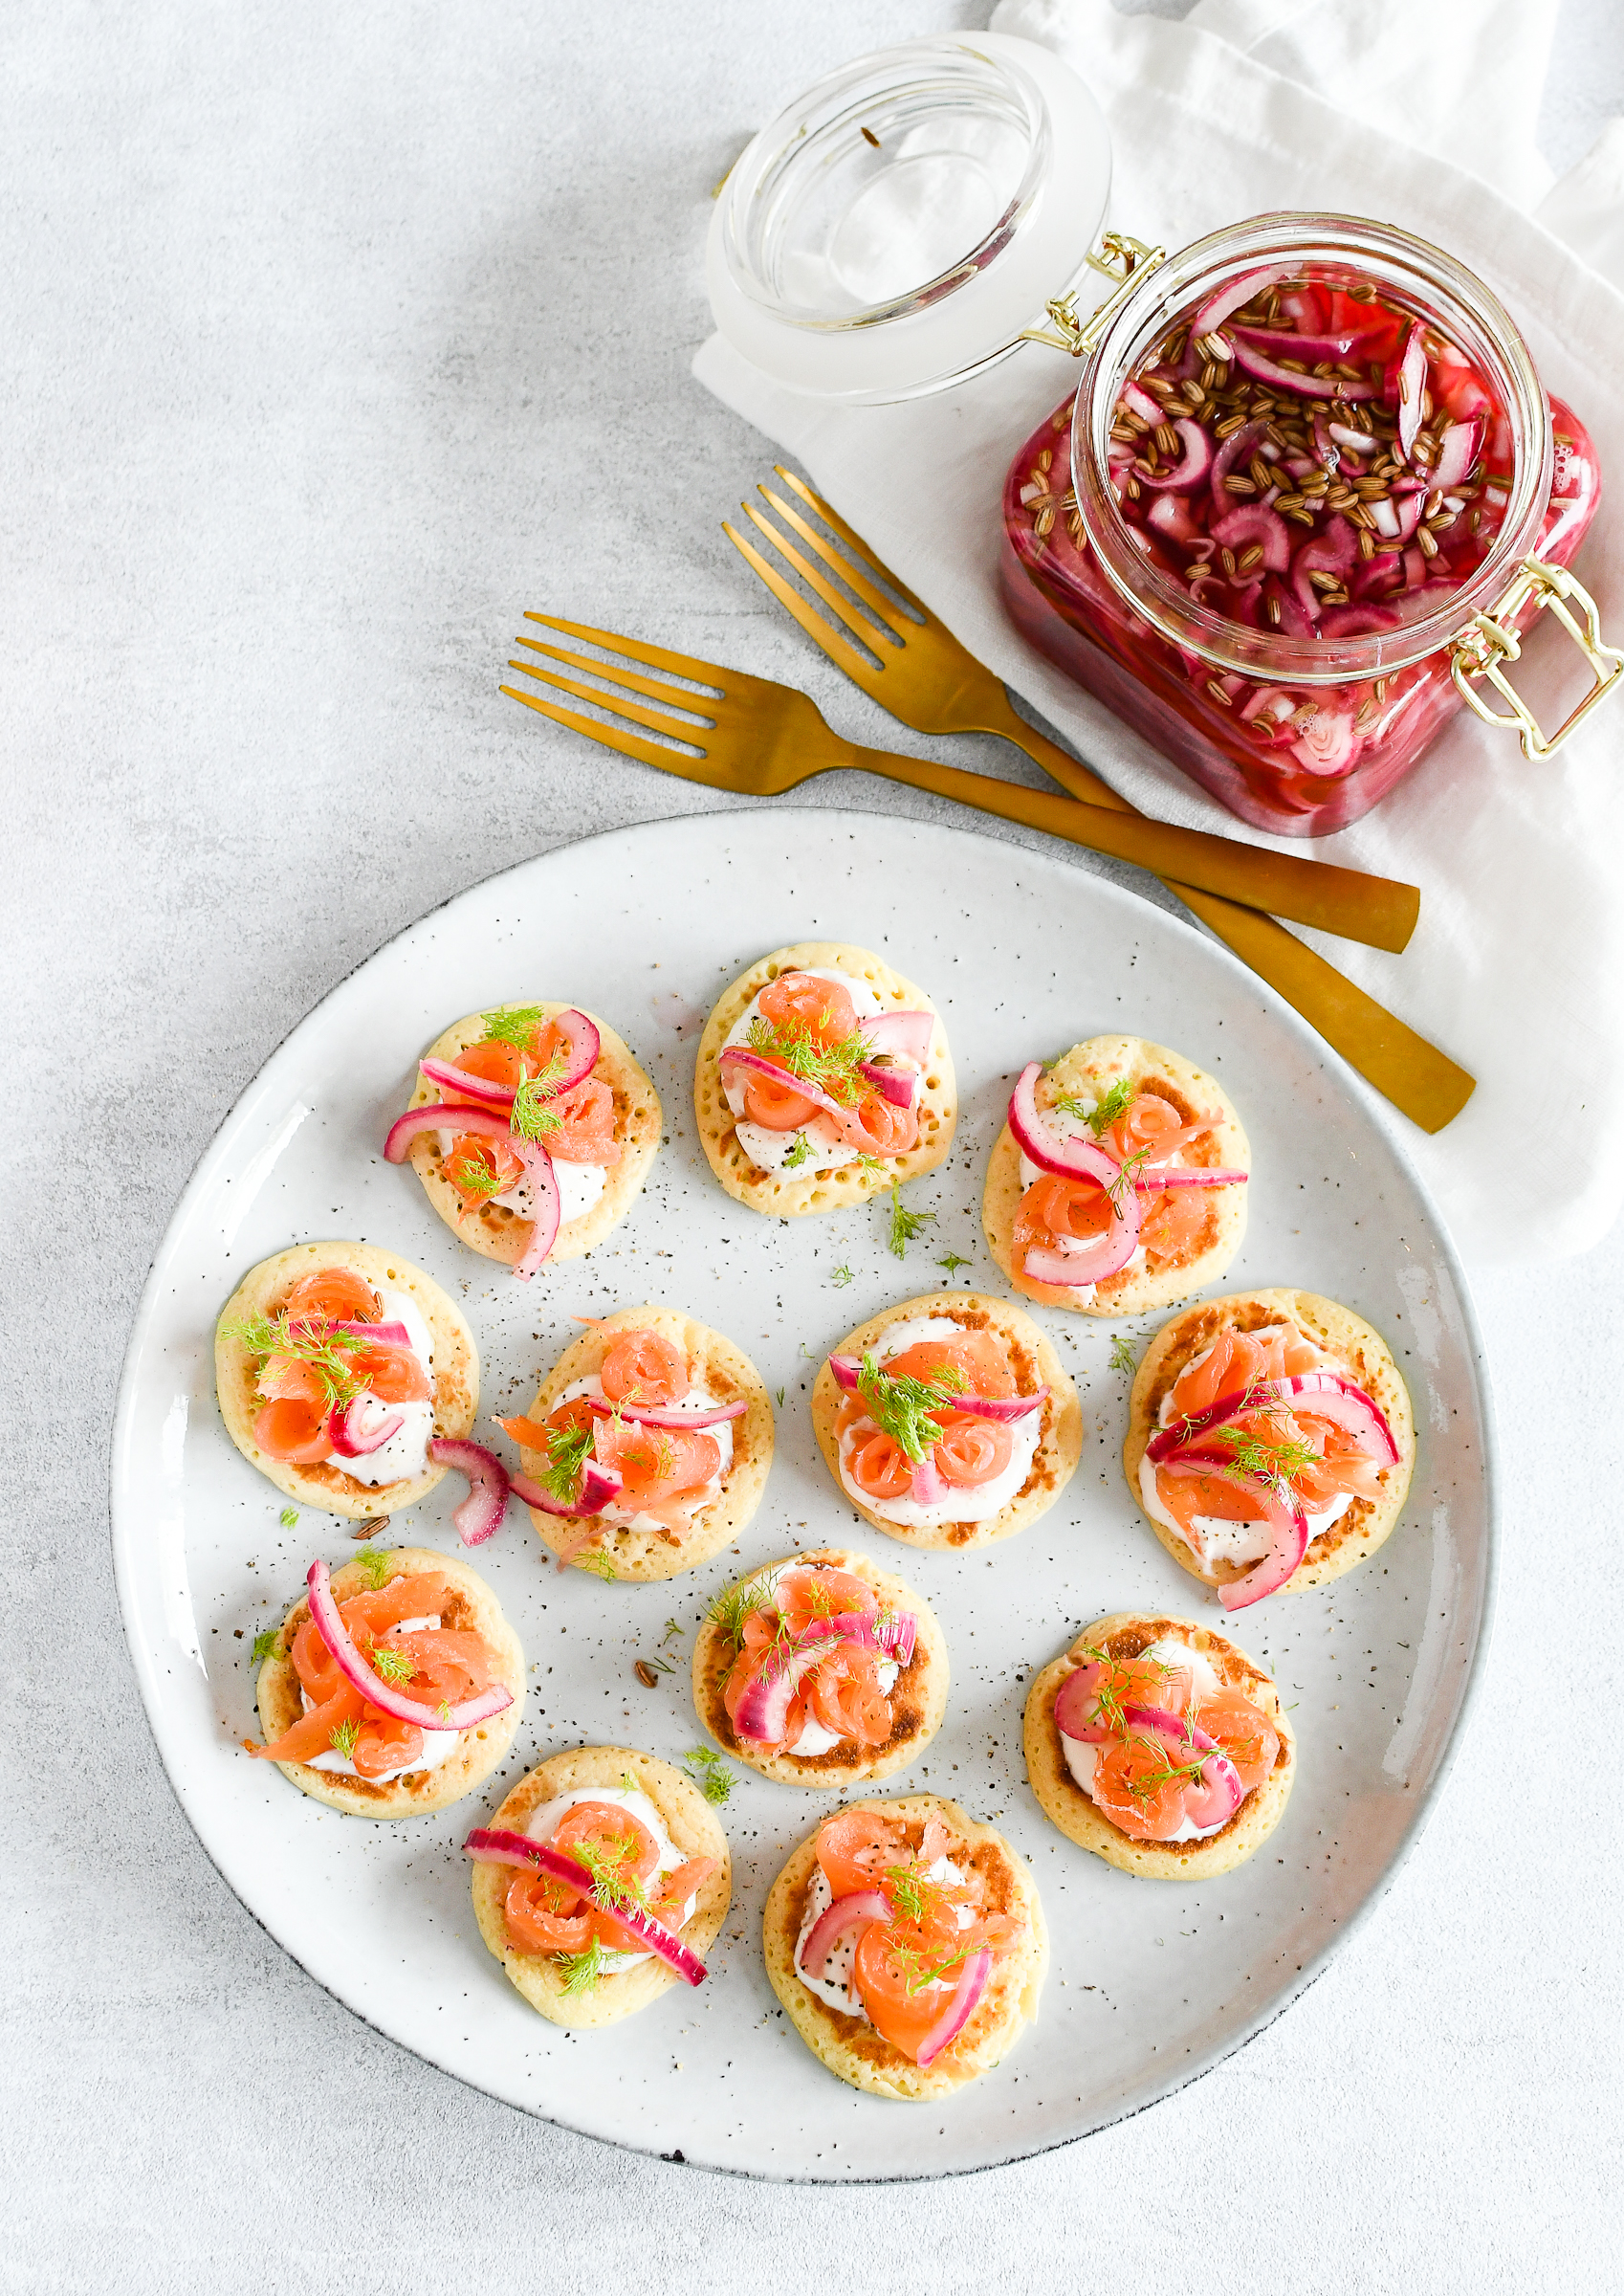 blini's met gerookte zalm en quick pickled red onion